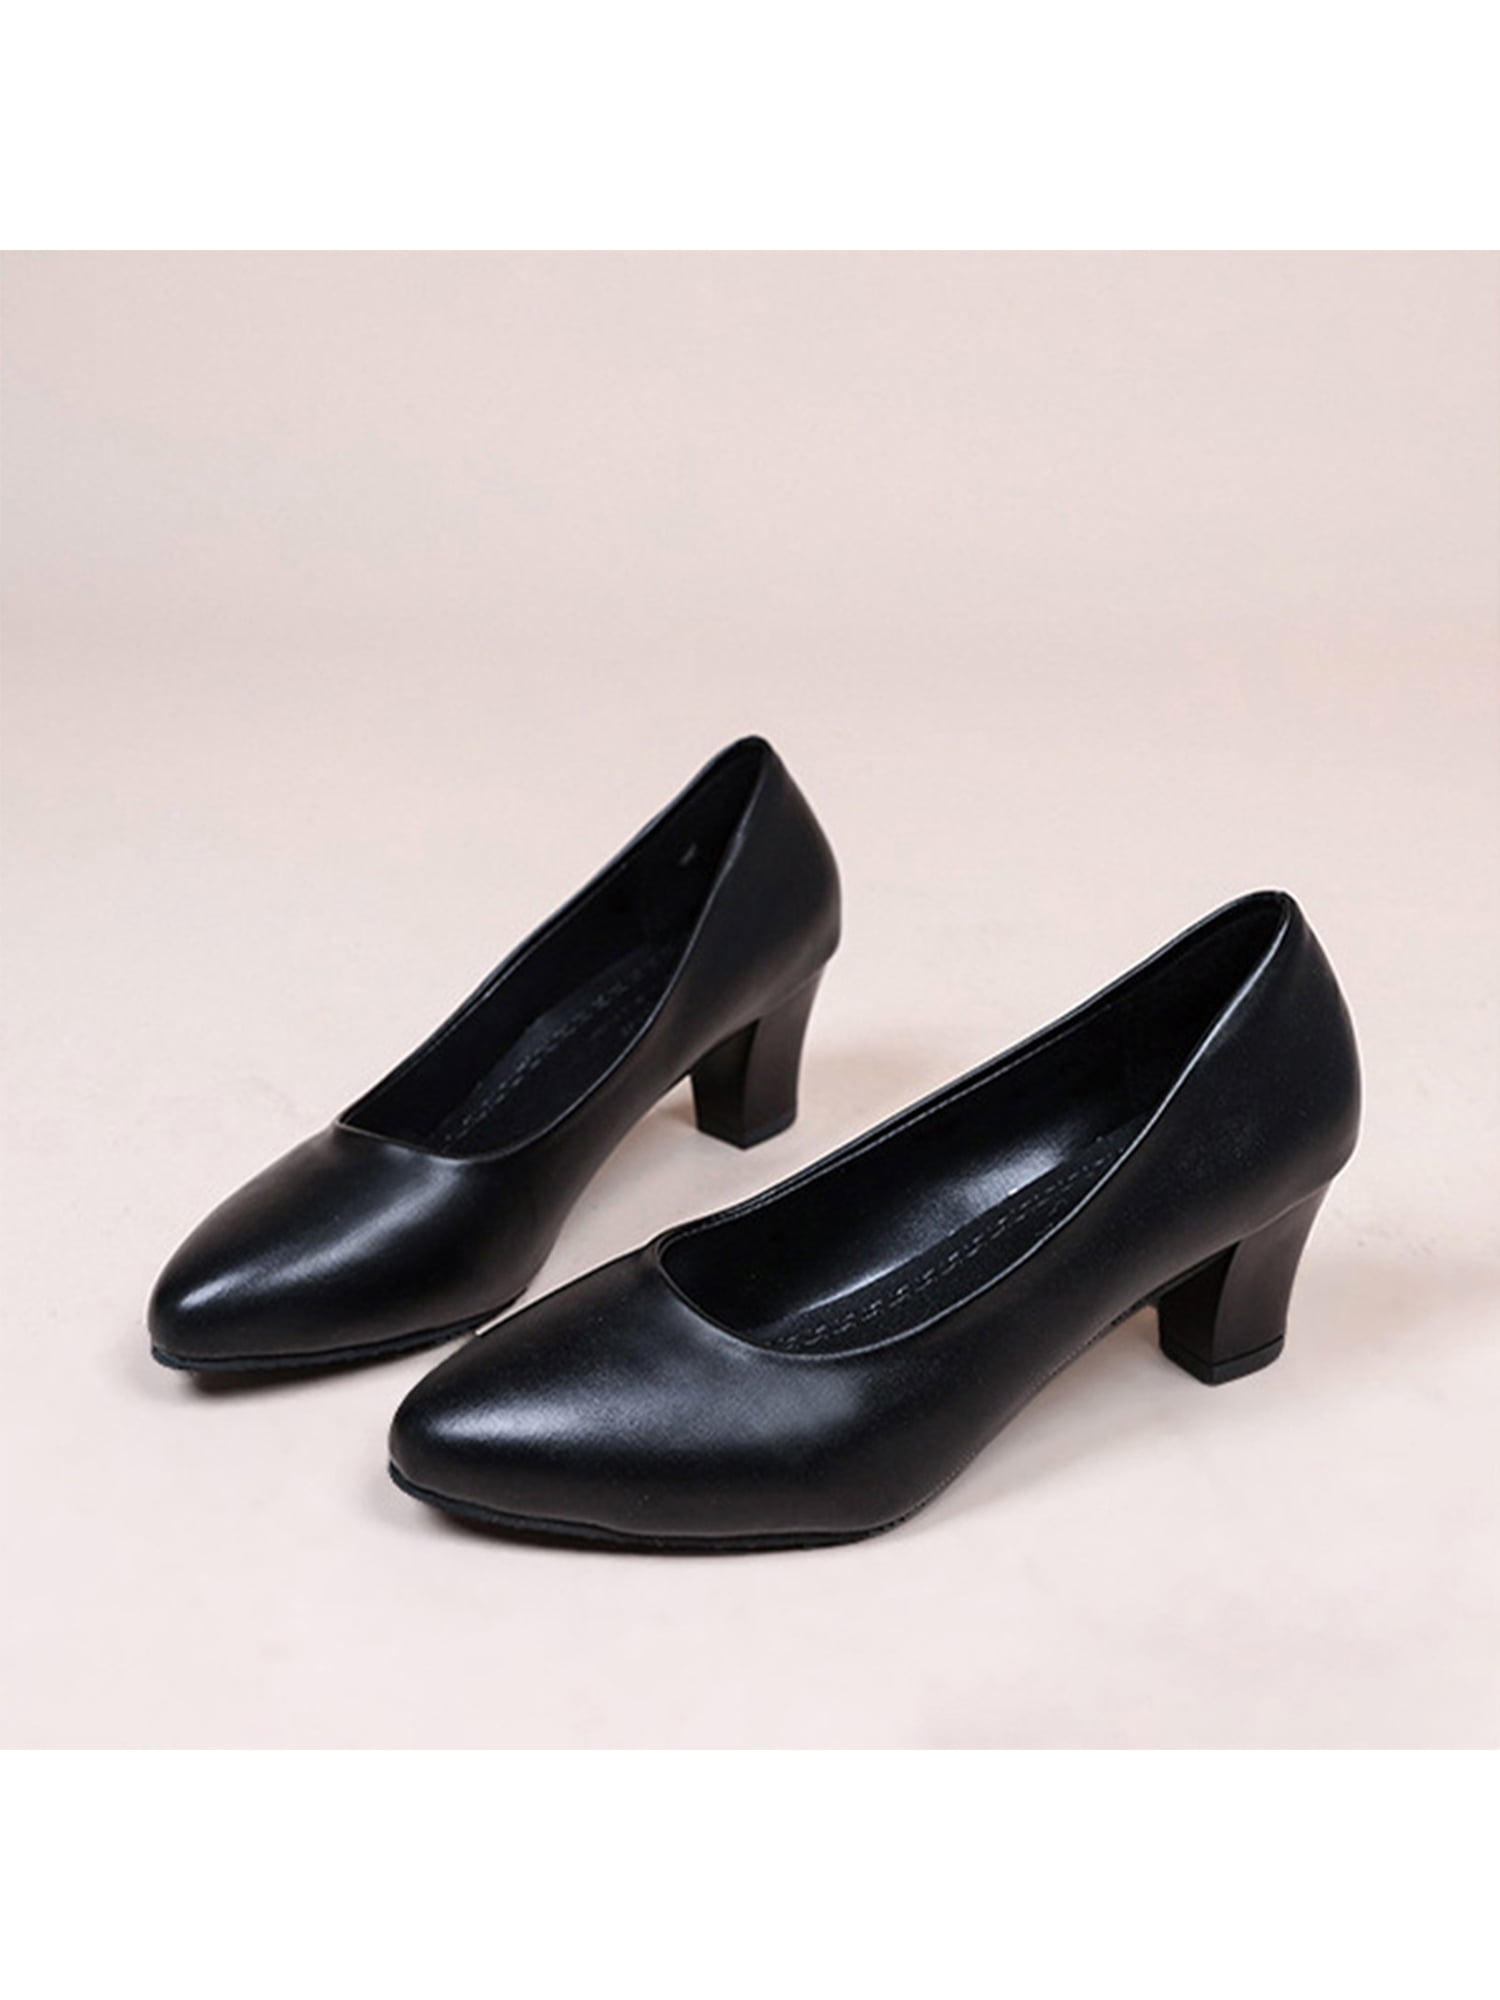 low heeled dress shoes for women